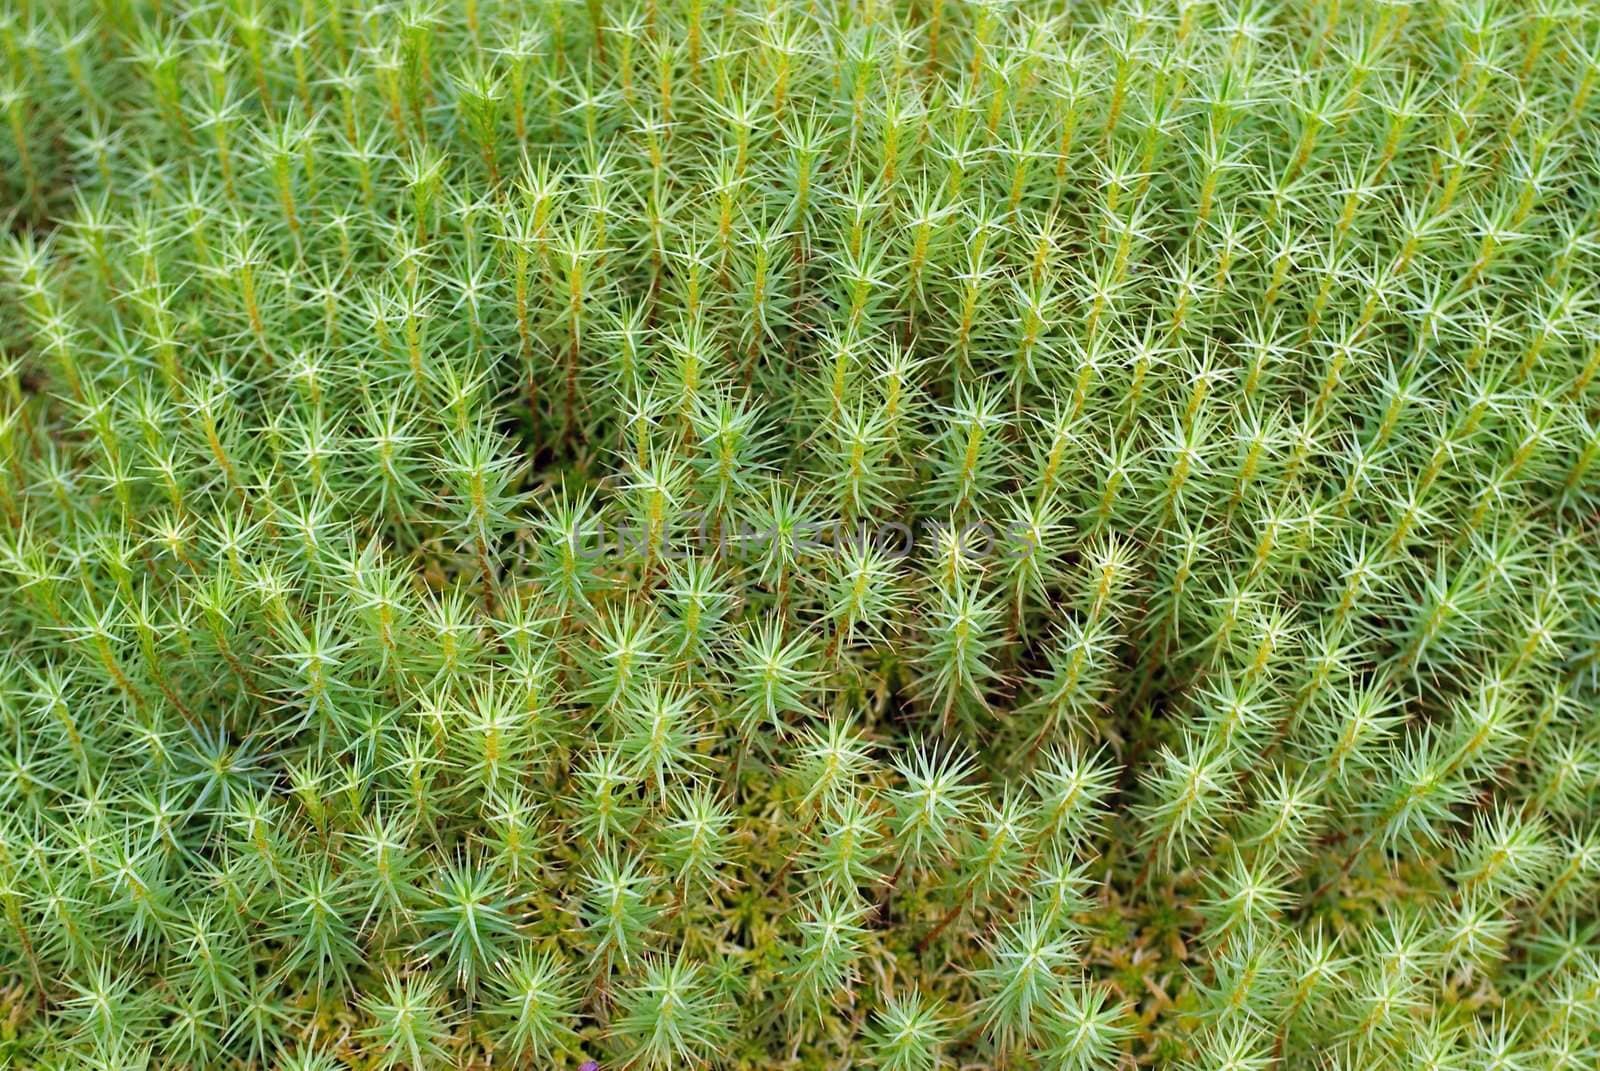  	A close up of Green Common Haircap Moss (Polythricum commune) in forest after heavy rainfall. Can be used as background.